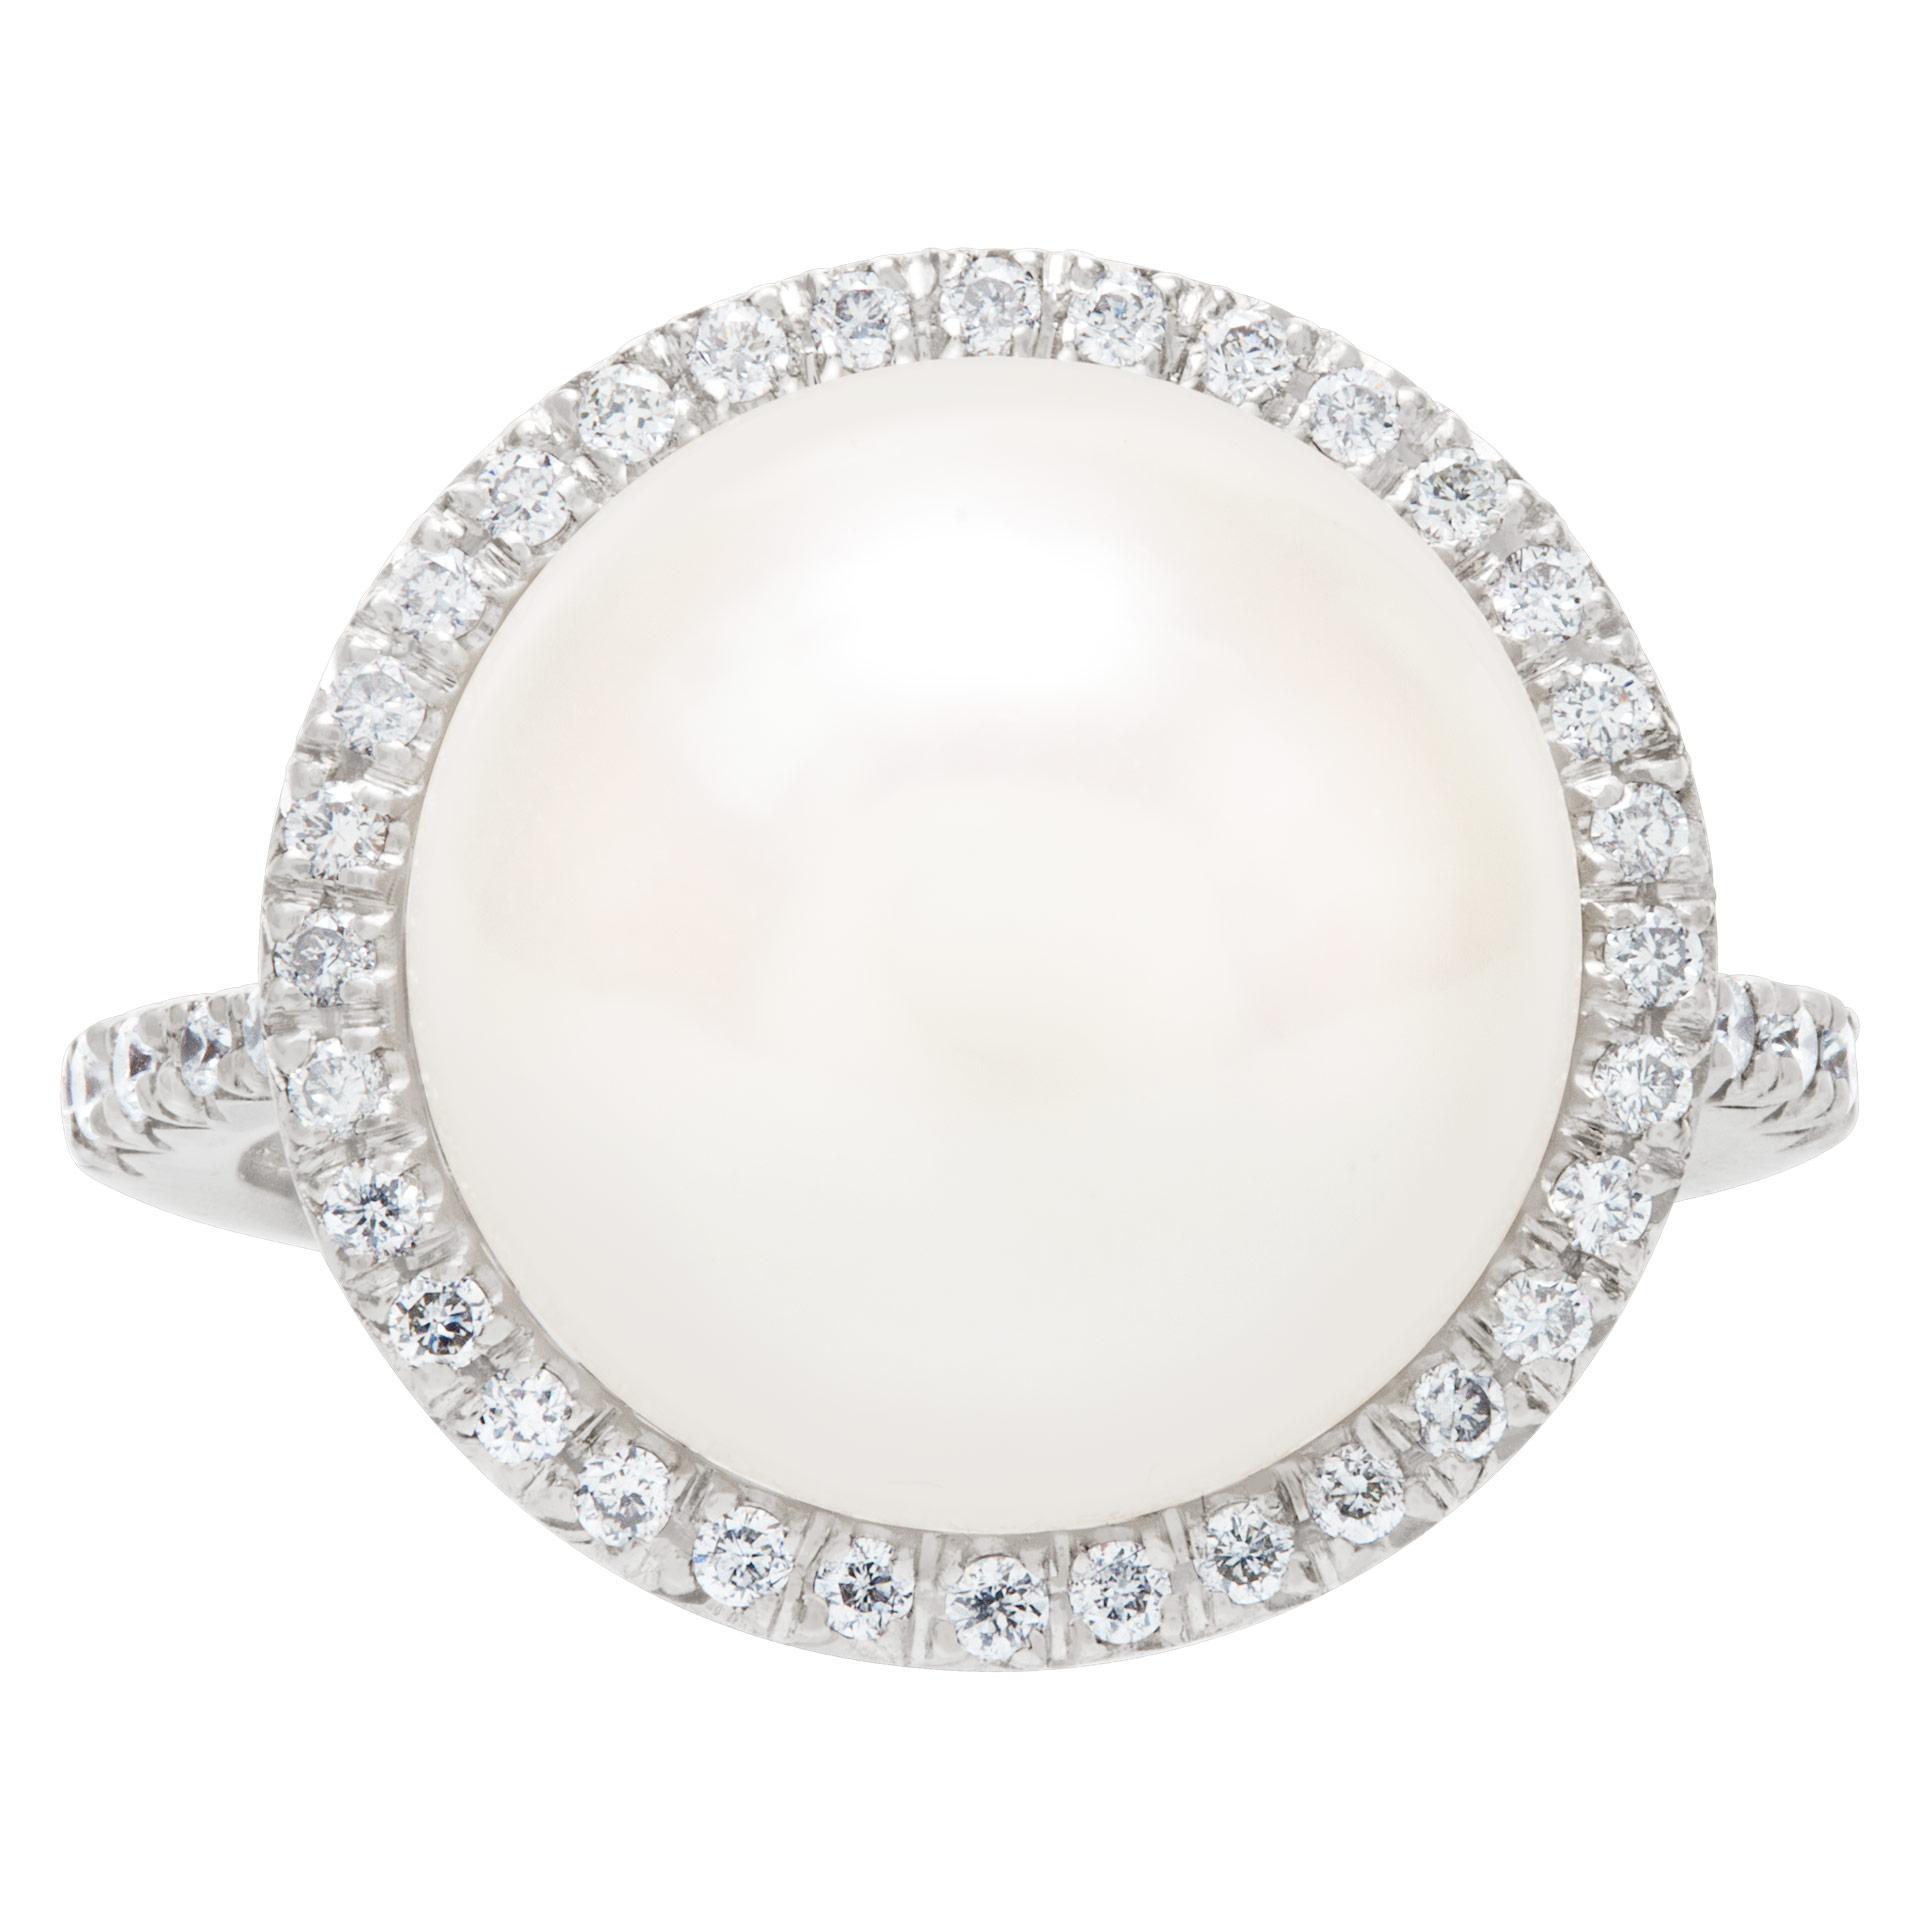 Pearl and diamond ring in 18k white gold. 13.2mm south sea pearl. 0.59 carats image 1